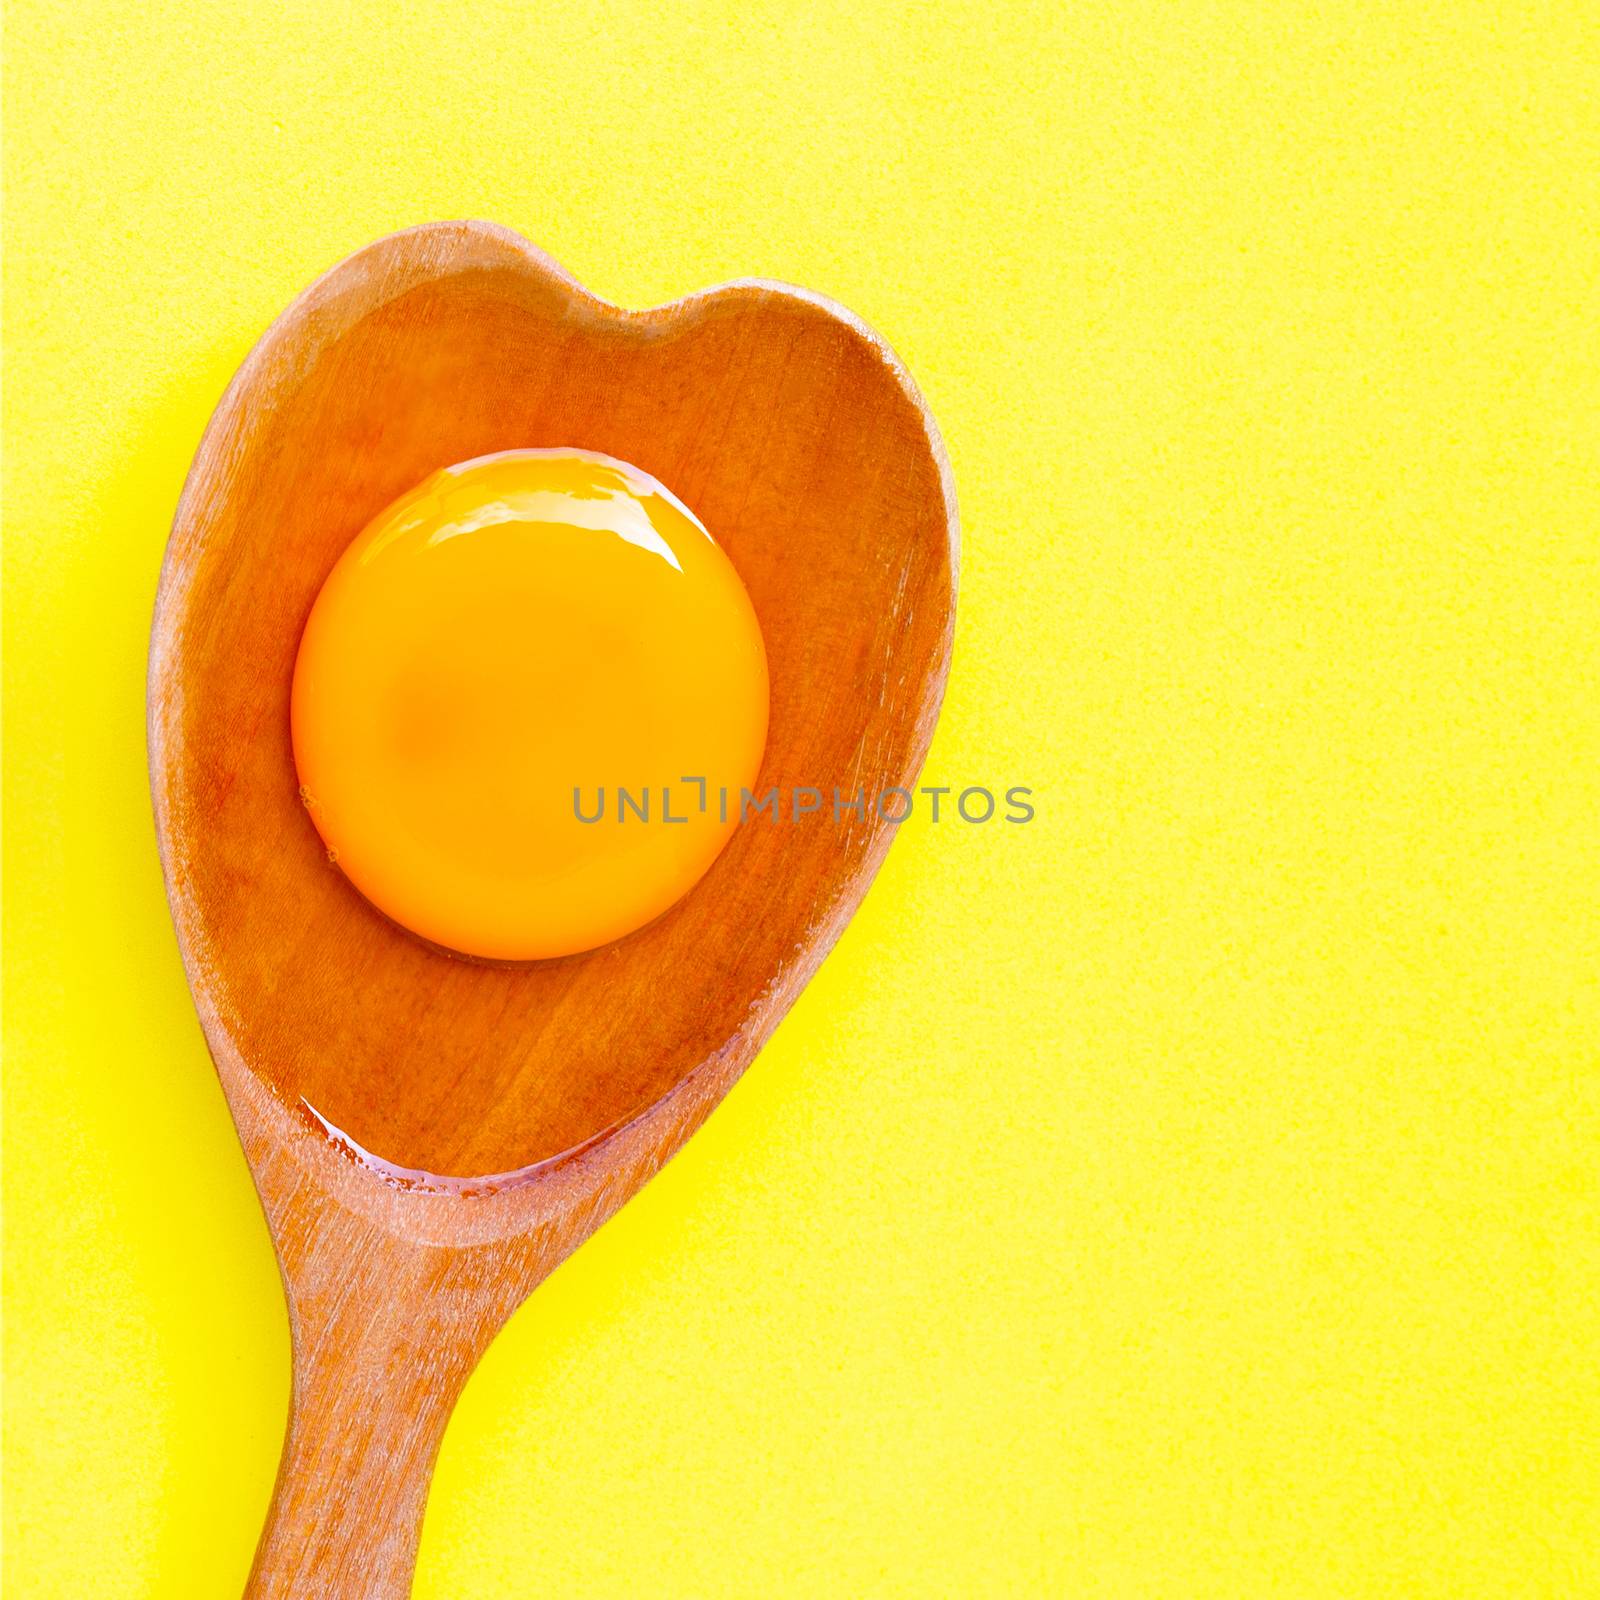 Egg yolk and white on  wooden spoon heart shape on yellow background. Top view